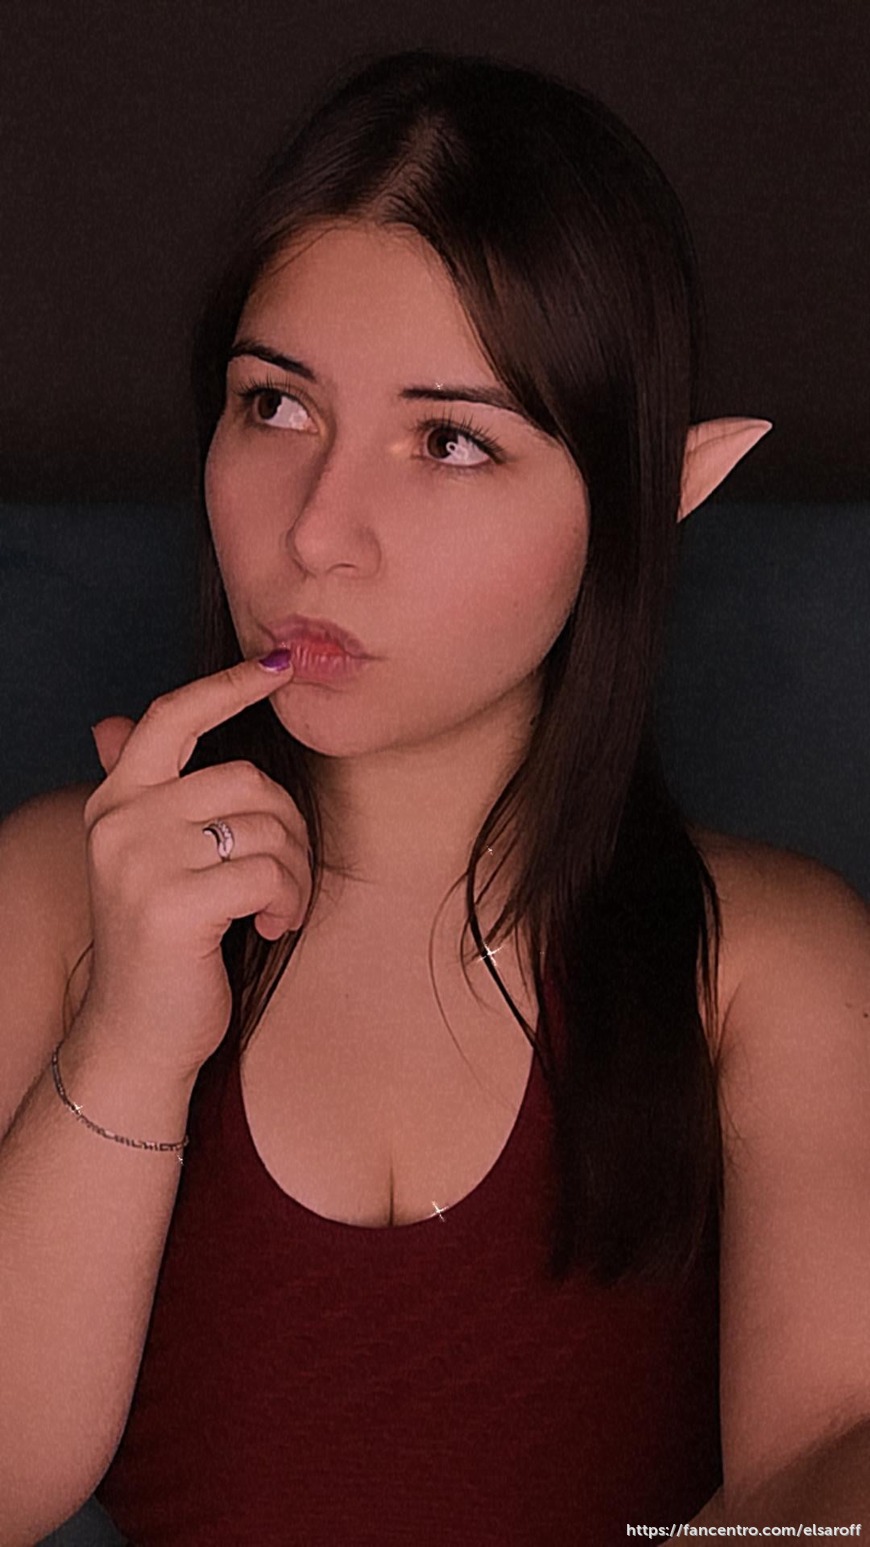 Today I tried on a new image) horny elf) 1